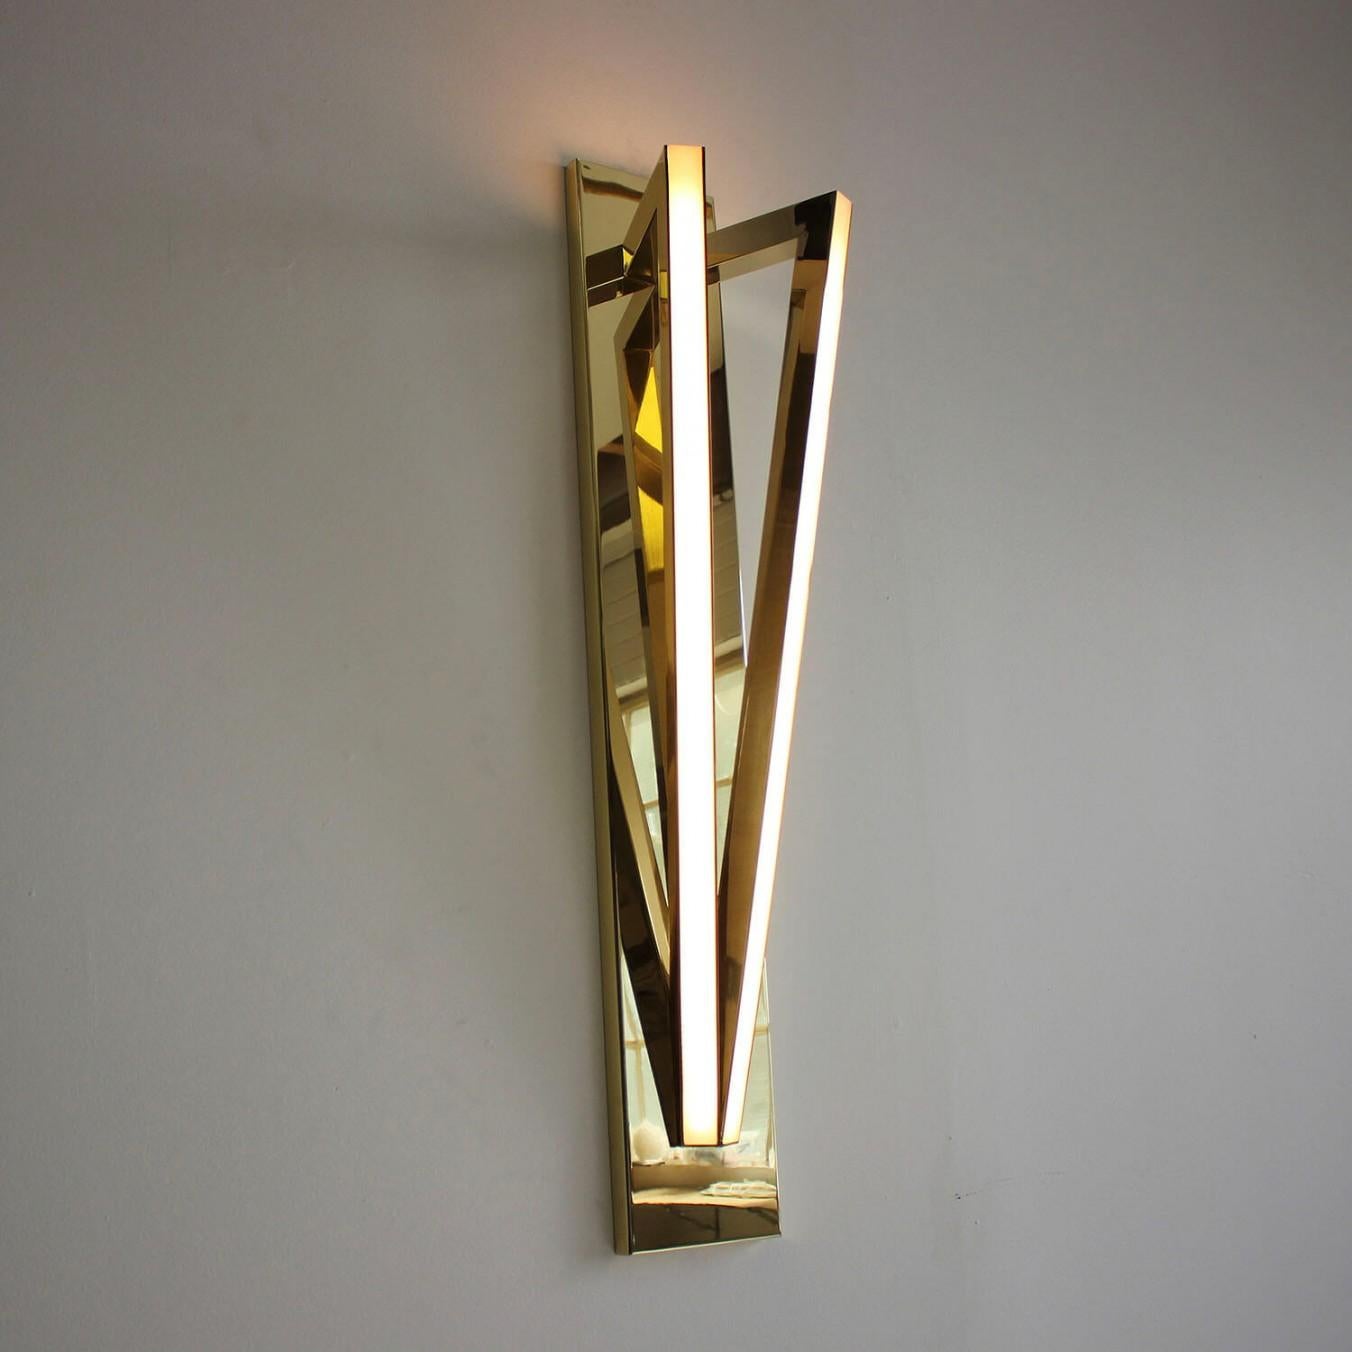 Contemporary Brass Wall Sconce - Pythagoras Twin 600 by Christopher Boots

Pythagoras, the revered philosopher and mathematician, believed the mysteries of our physical world could be revealed through Mathematics. For Pythagoras, numbers had